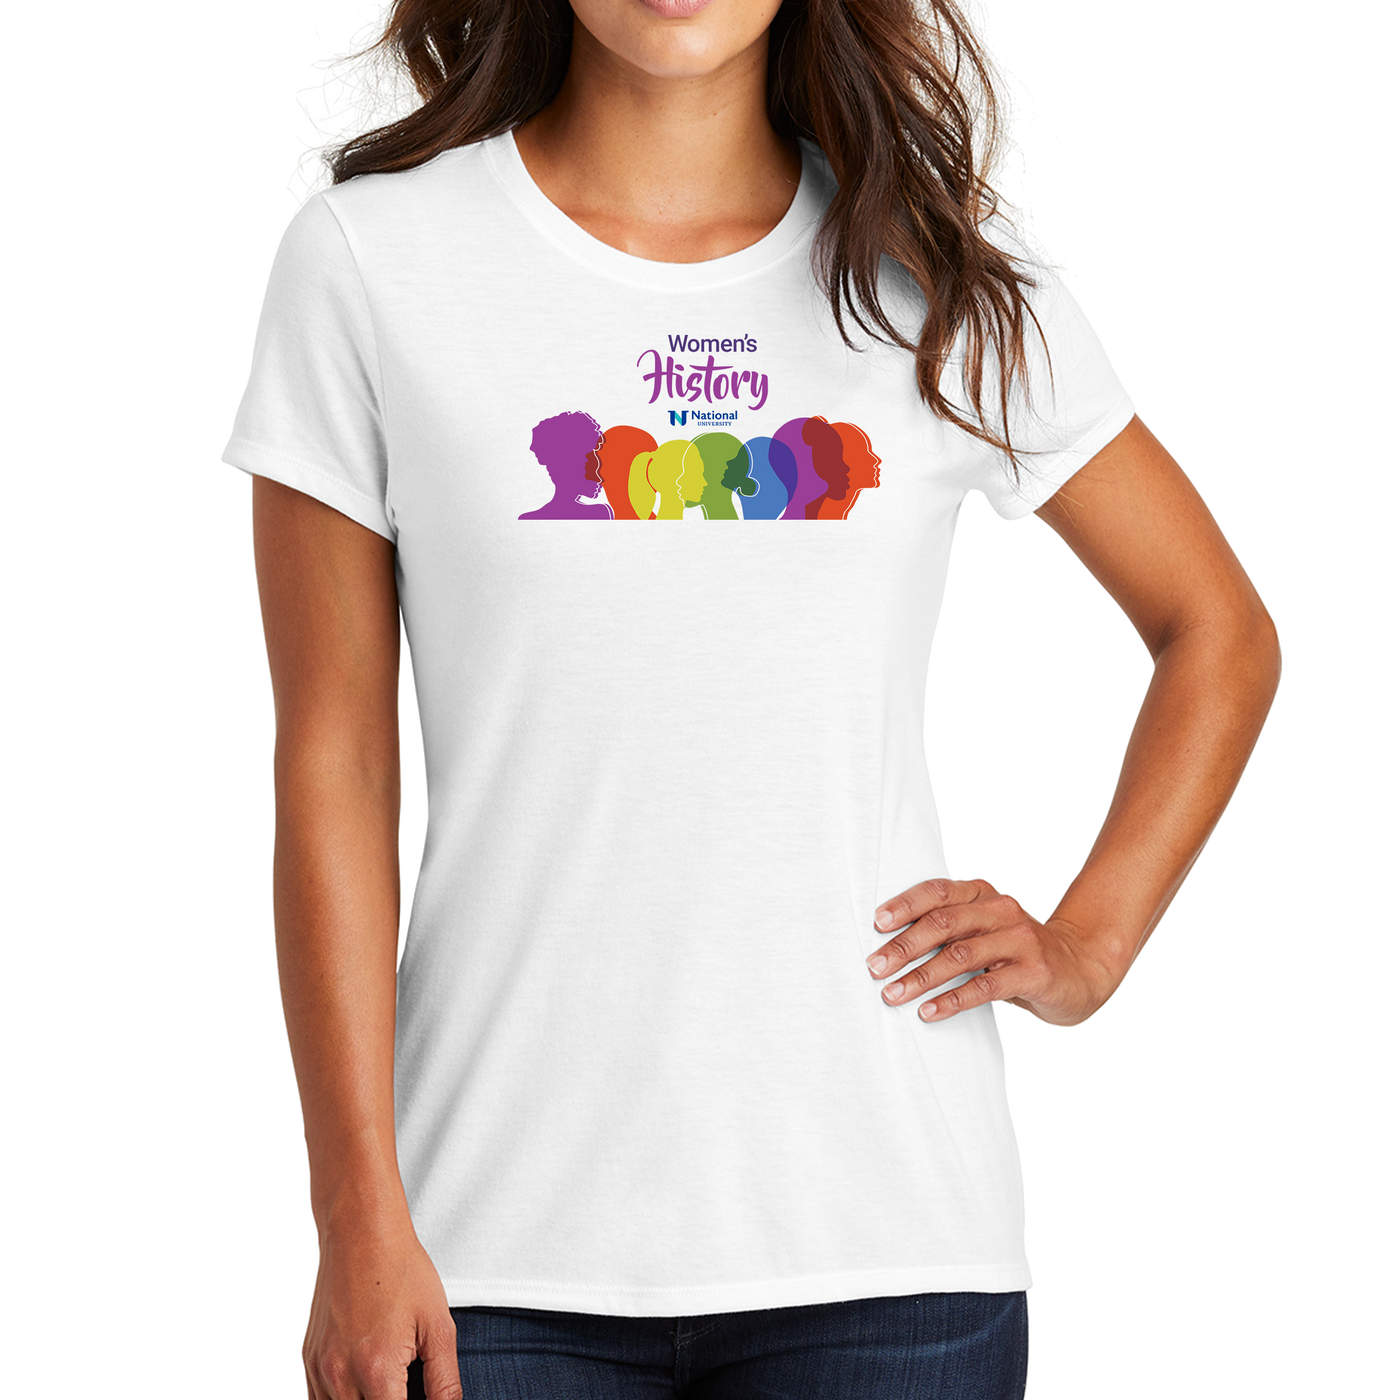 District Made® Ladies Perfect Tri® Crew Tee - Women's History 1